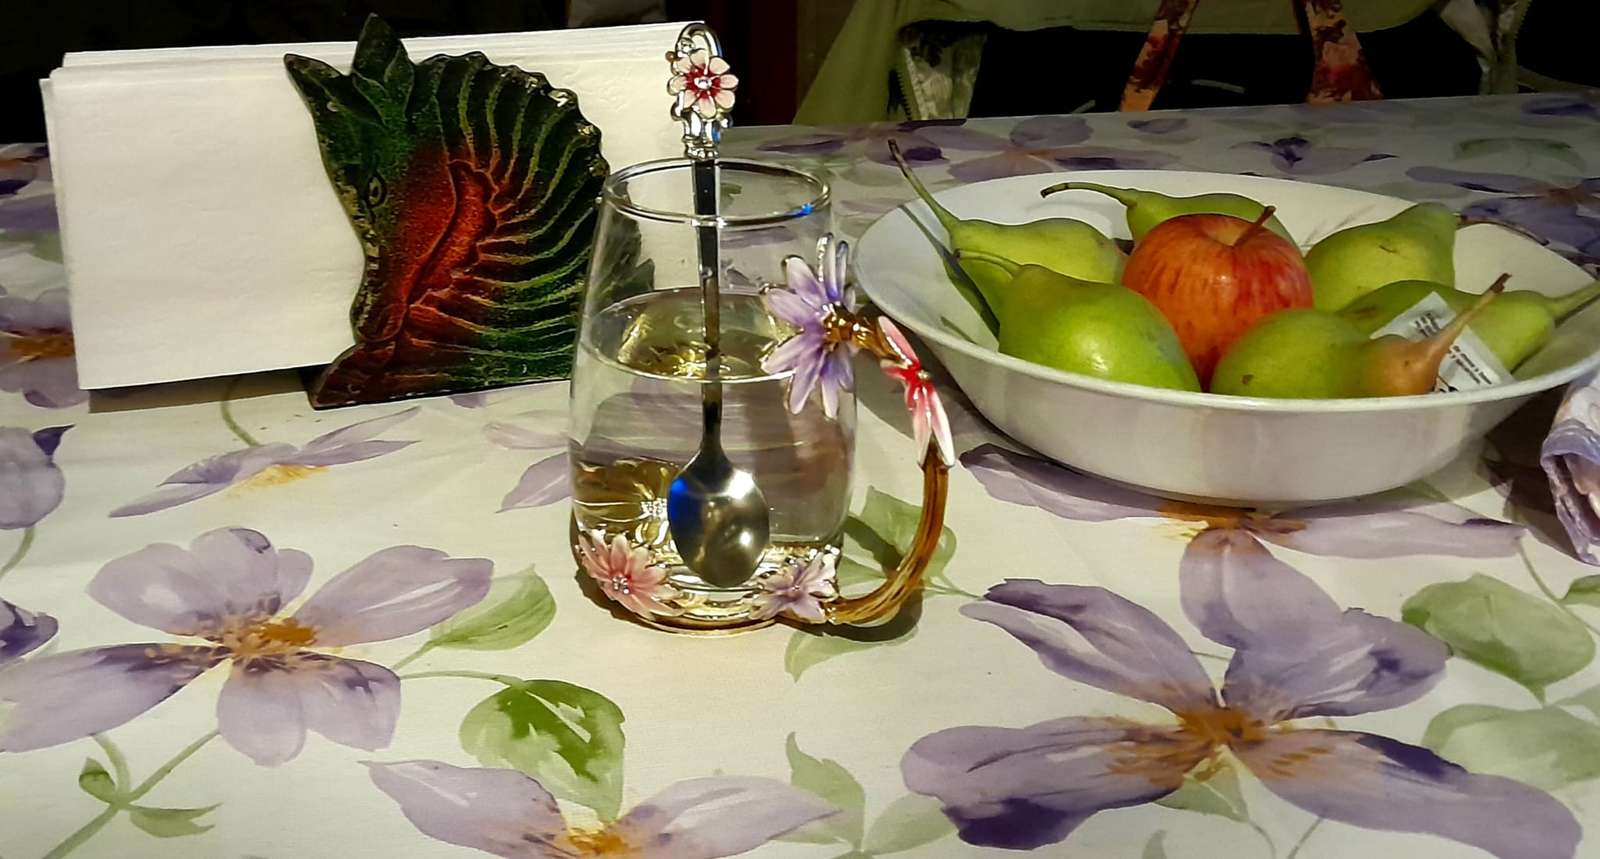 Still life on my table online puzzle